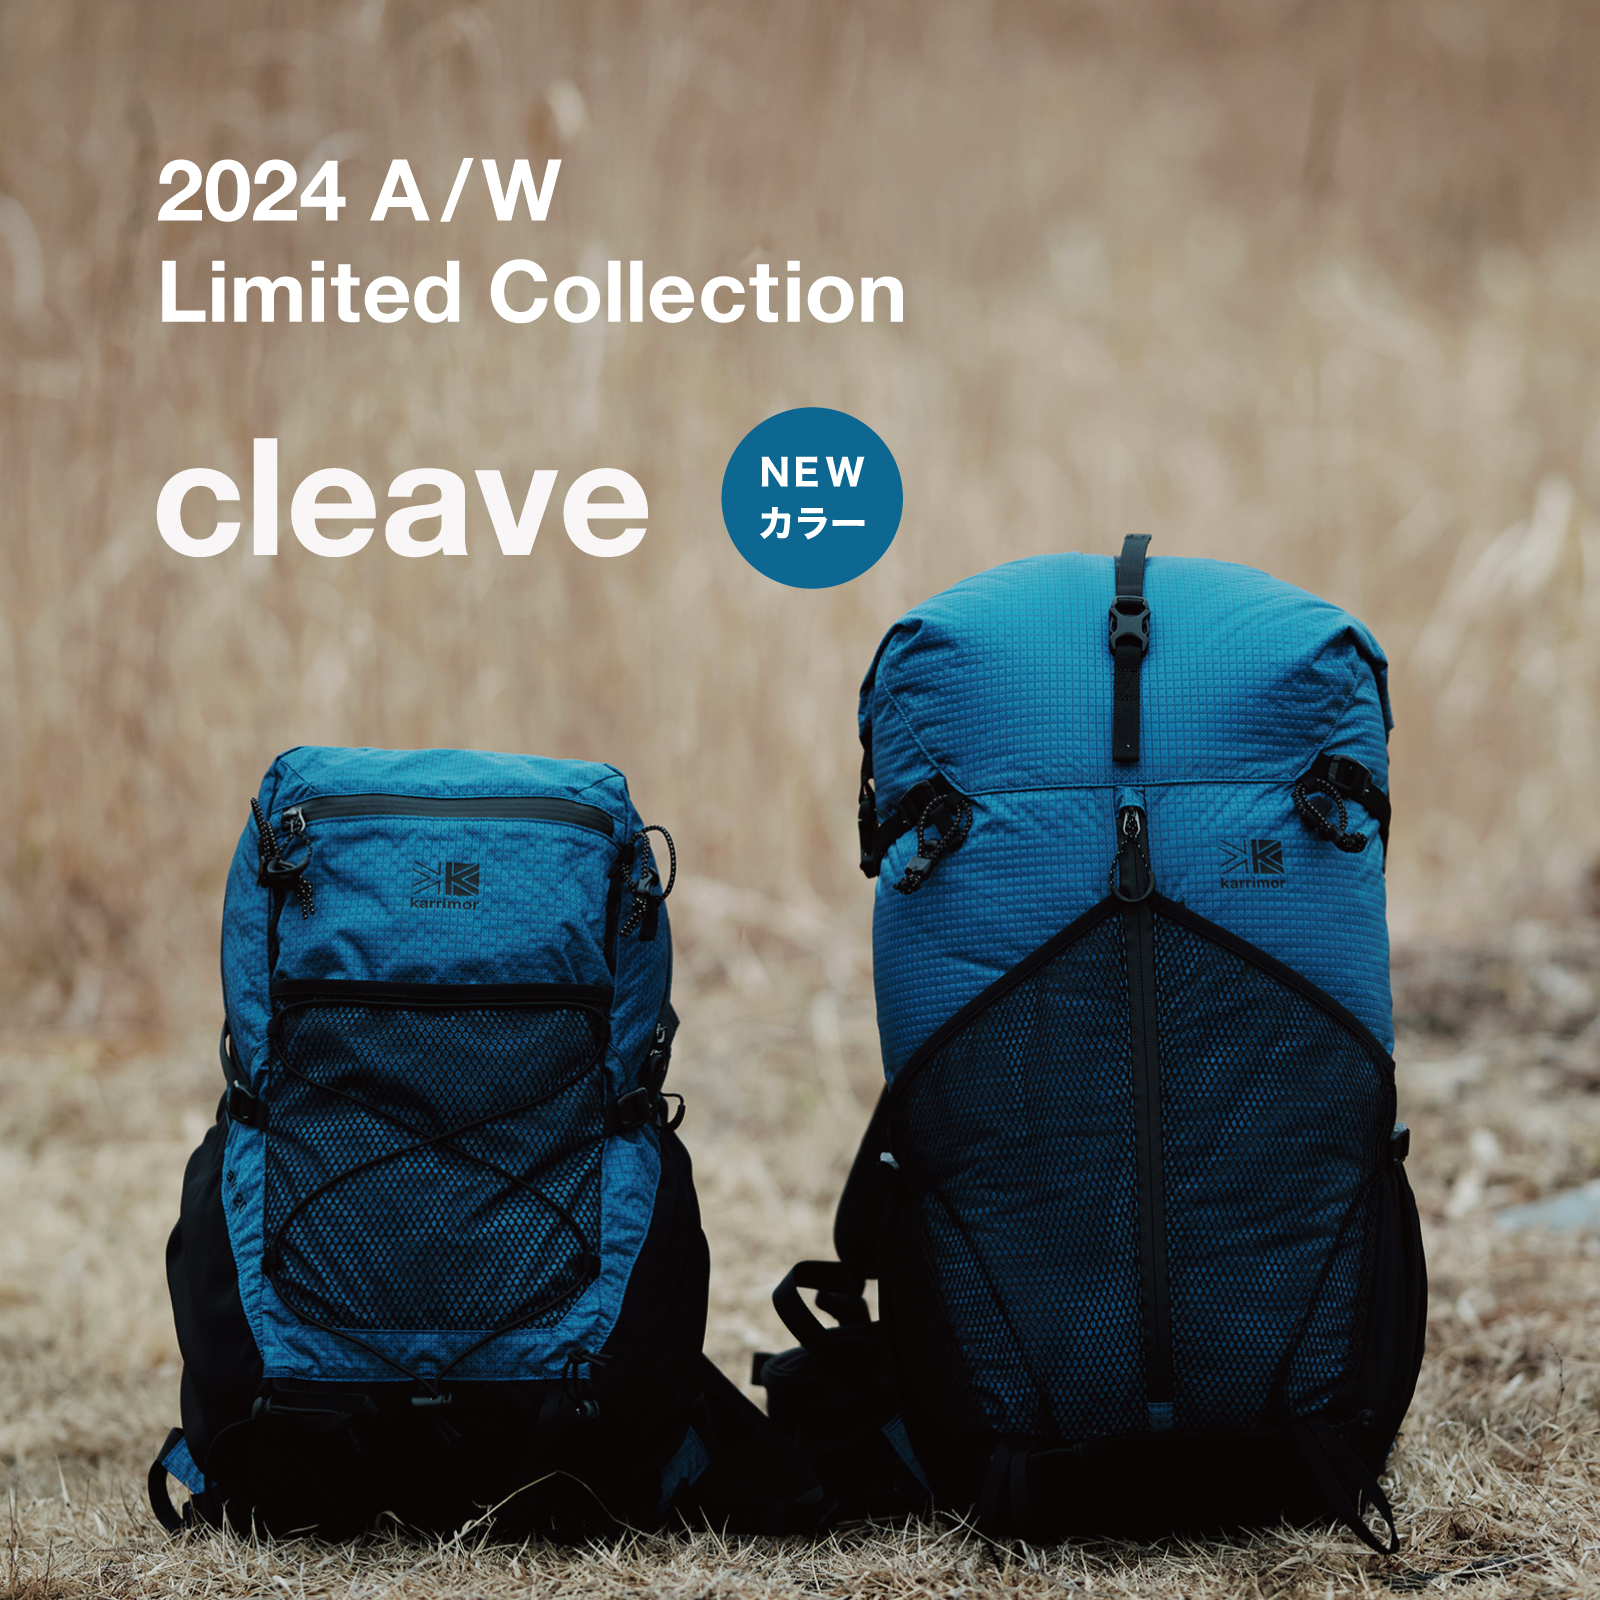 24AW Limited Rucksack Collection[cleave]